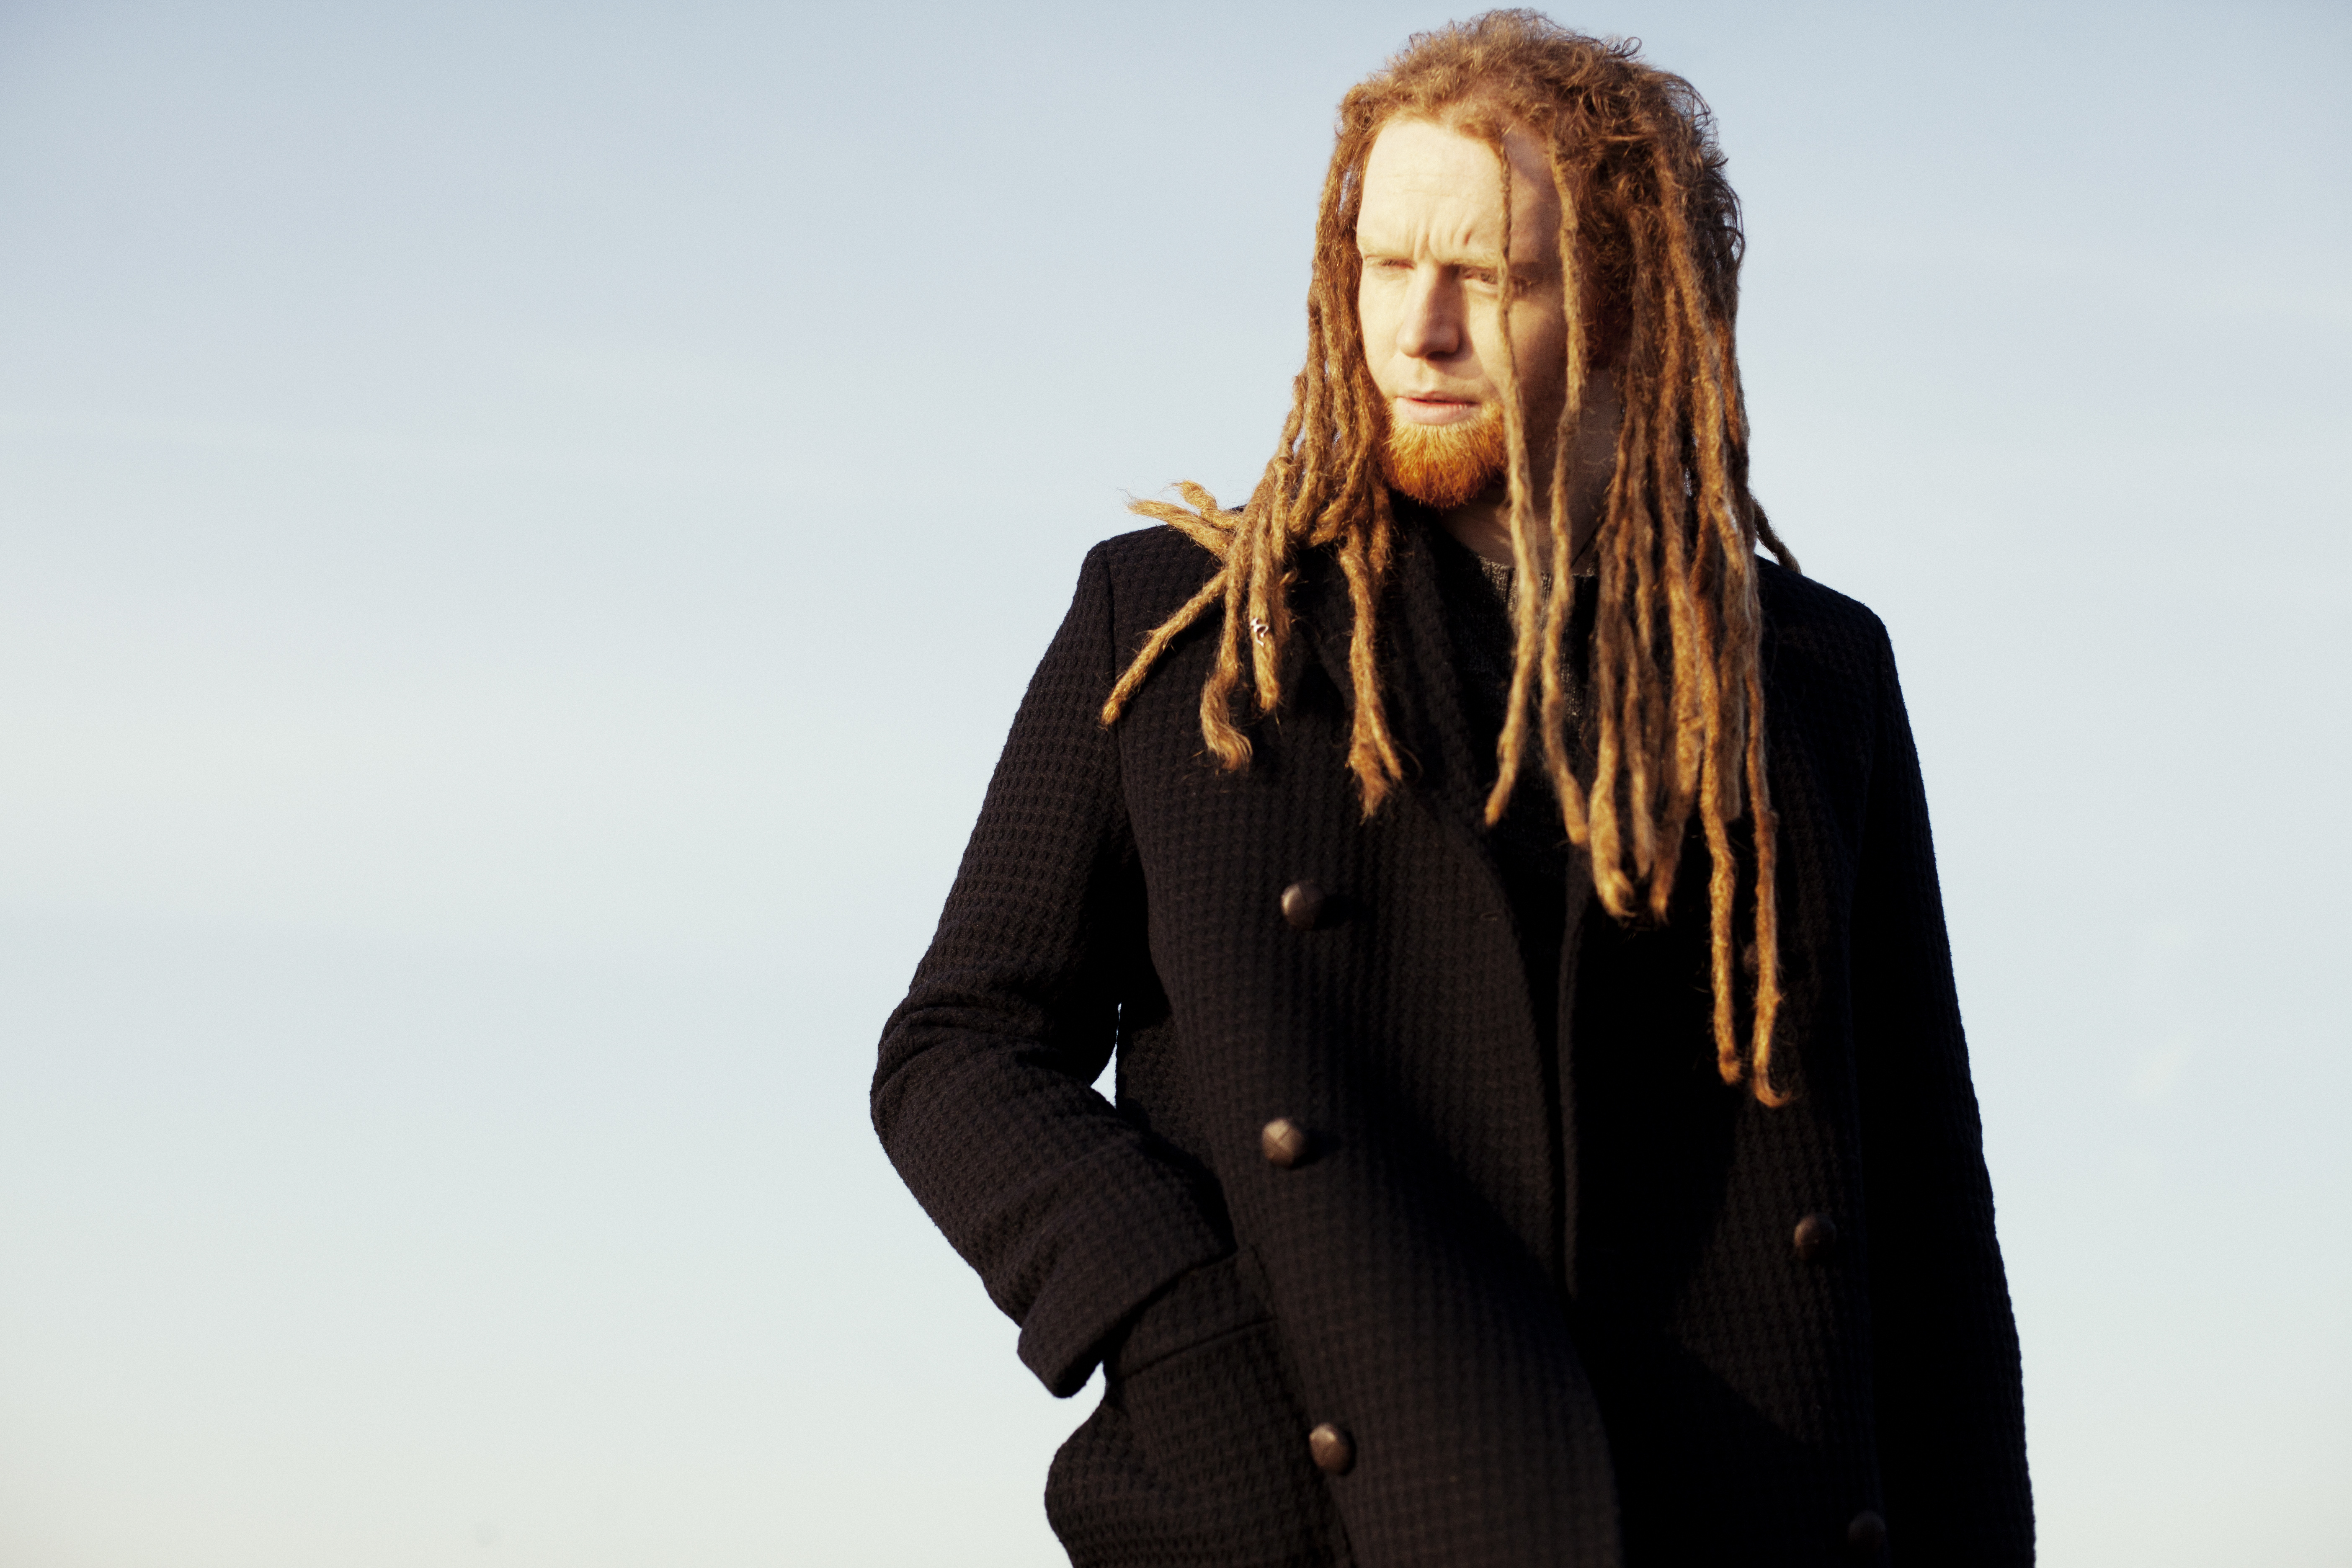 Newton Faulkner has been announced as one of the headliners at this year's Big Burns Festival in Dumfries.